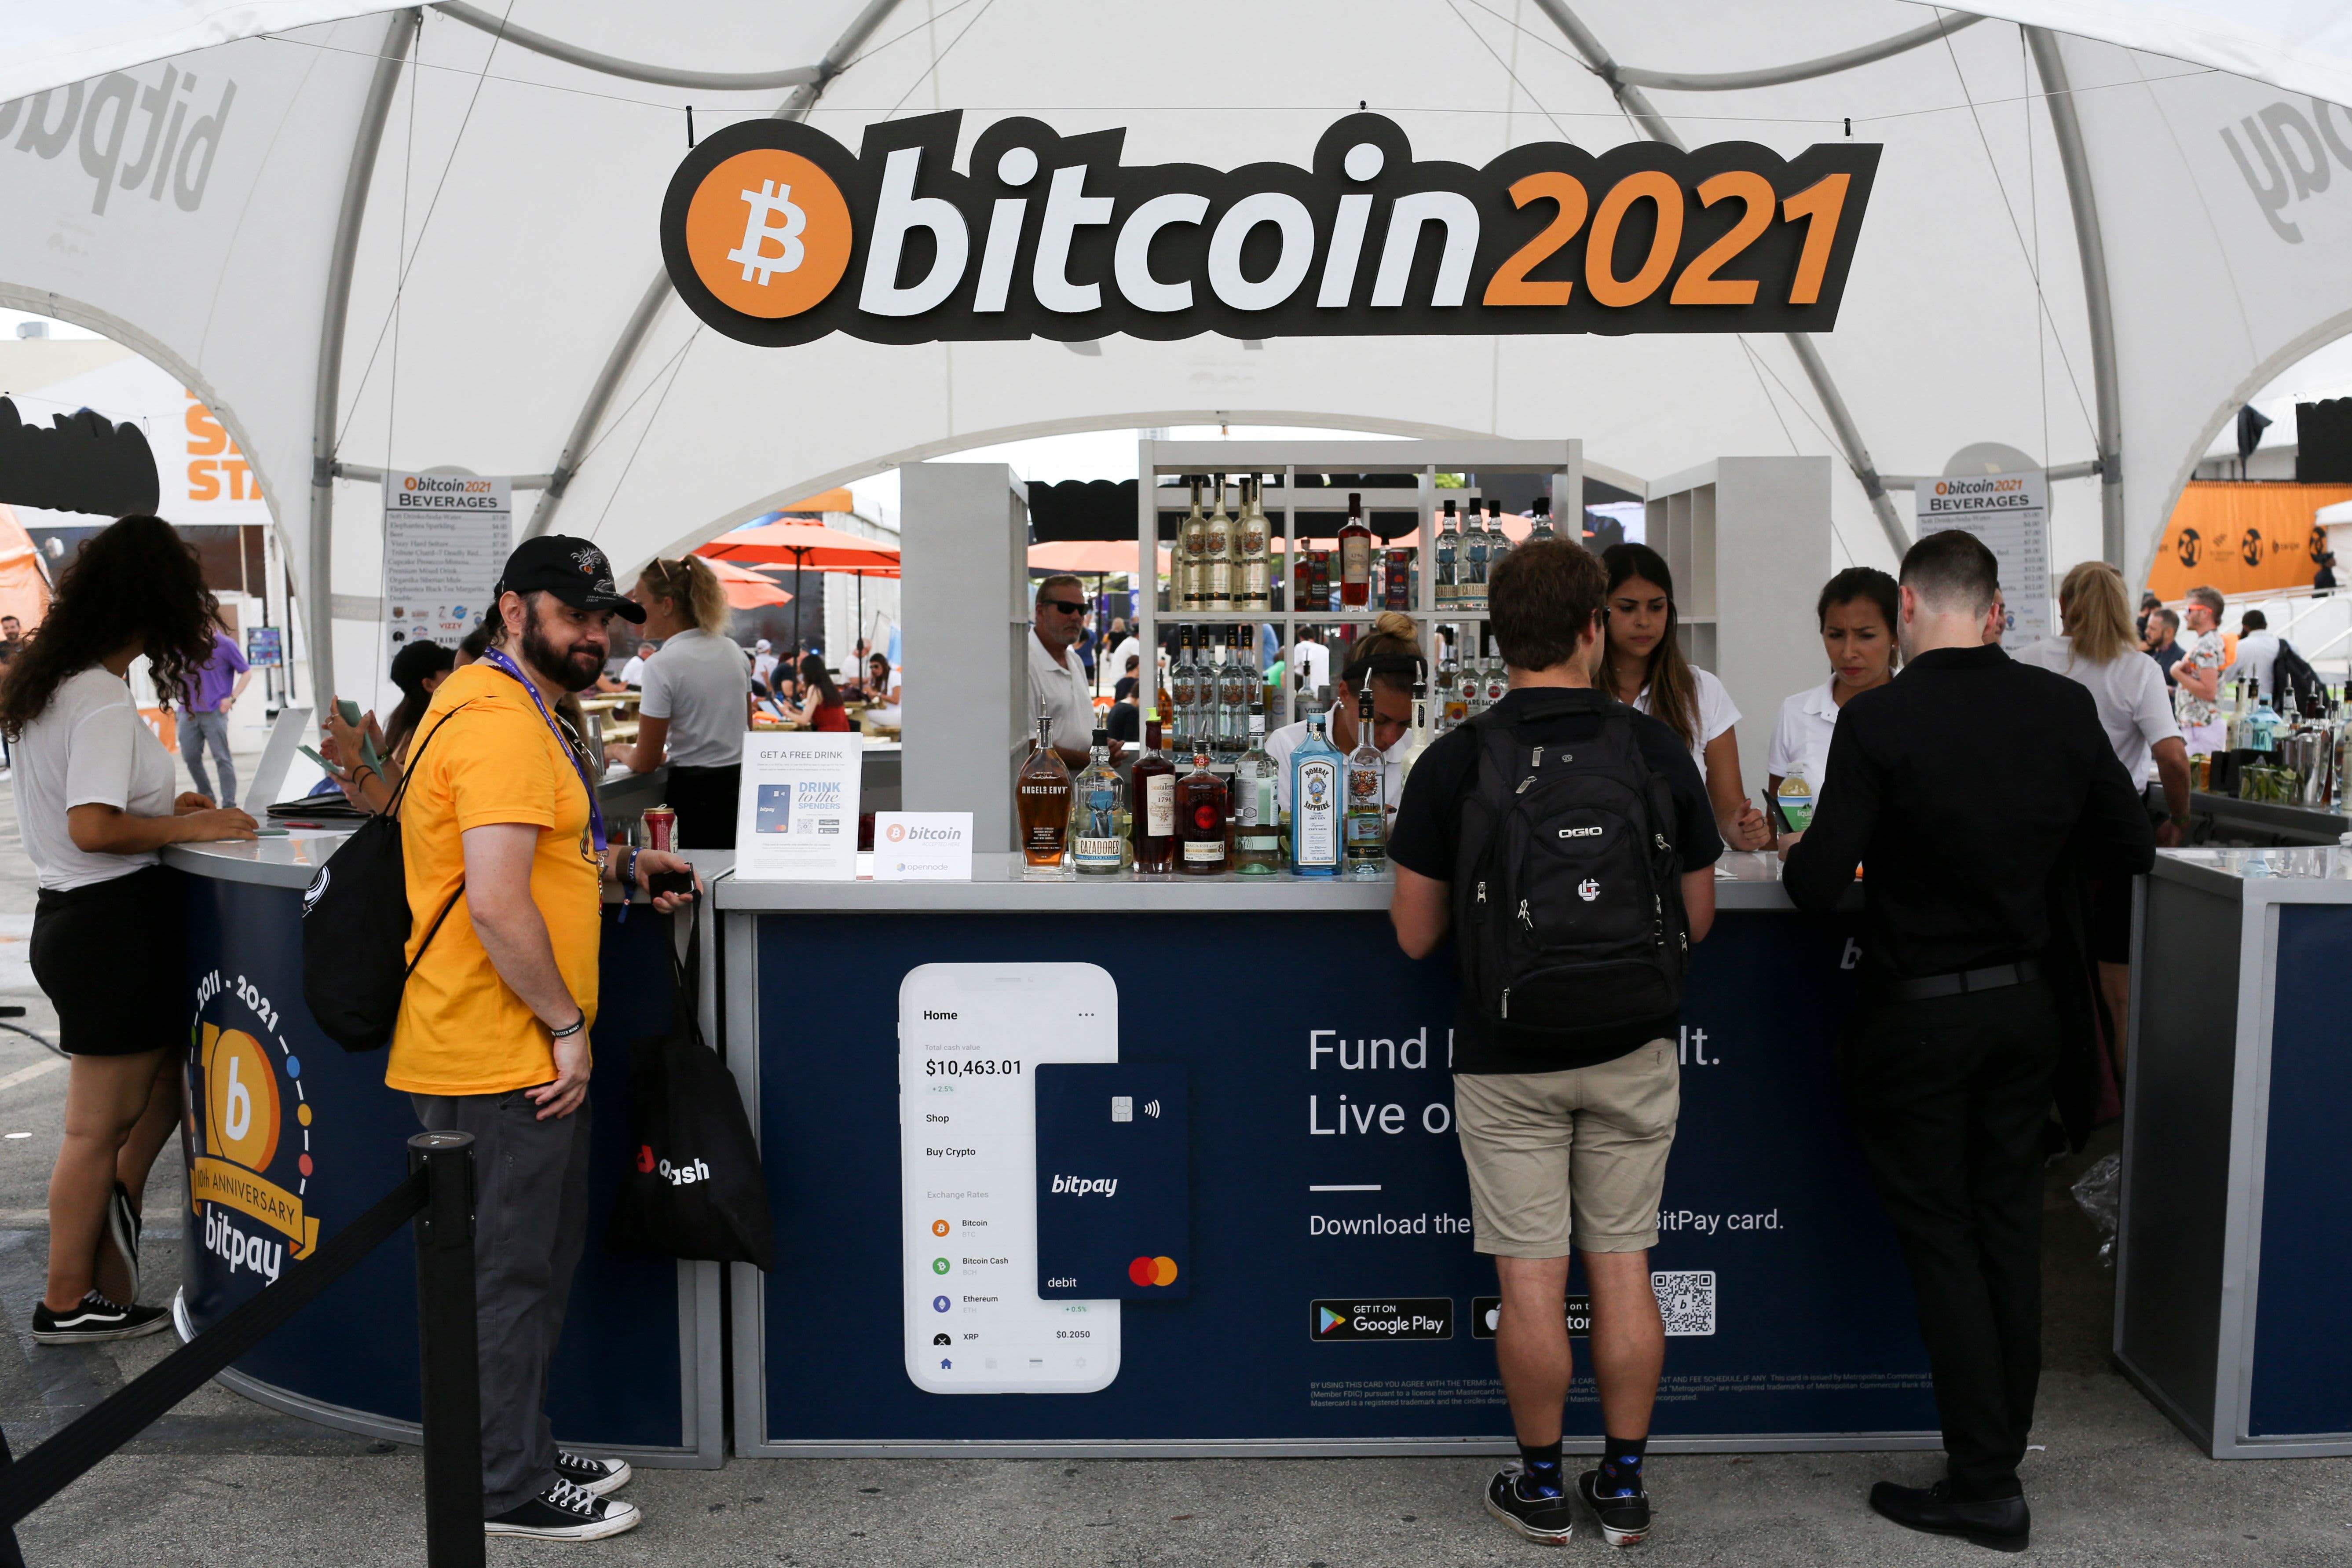 Thousands of bitcoin believers descended on Miami to party and preach the gospel of 'HODL'